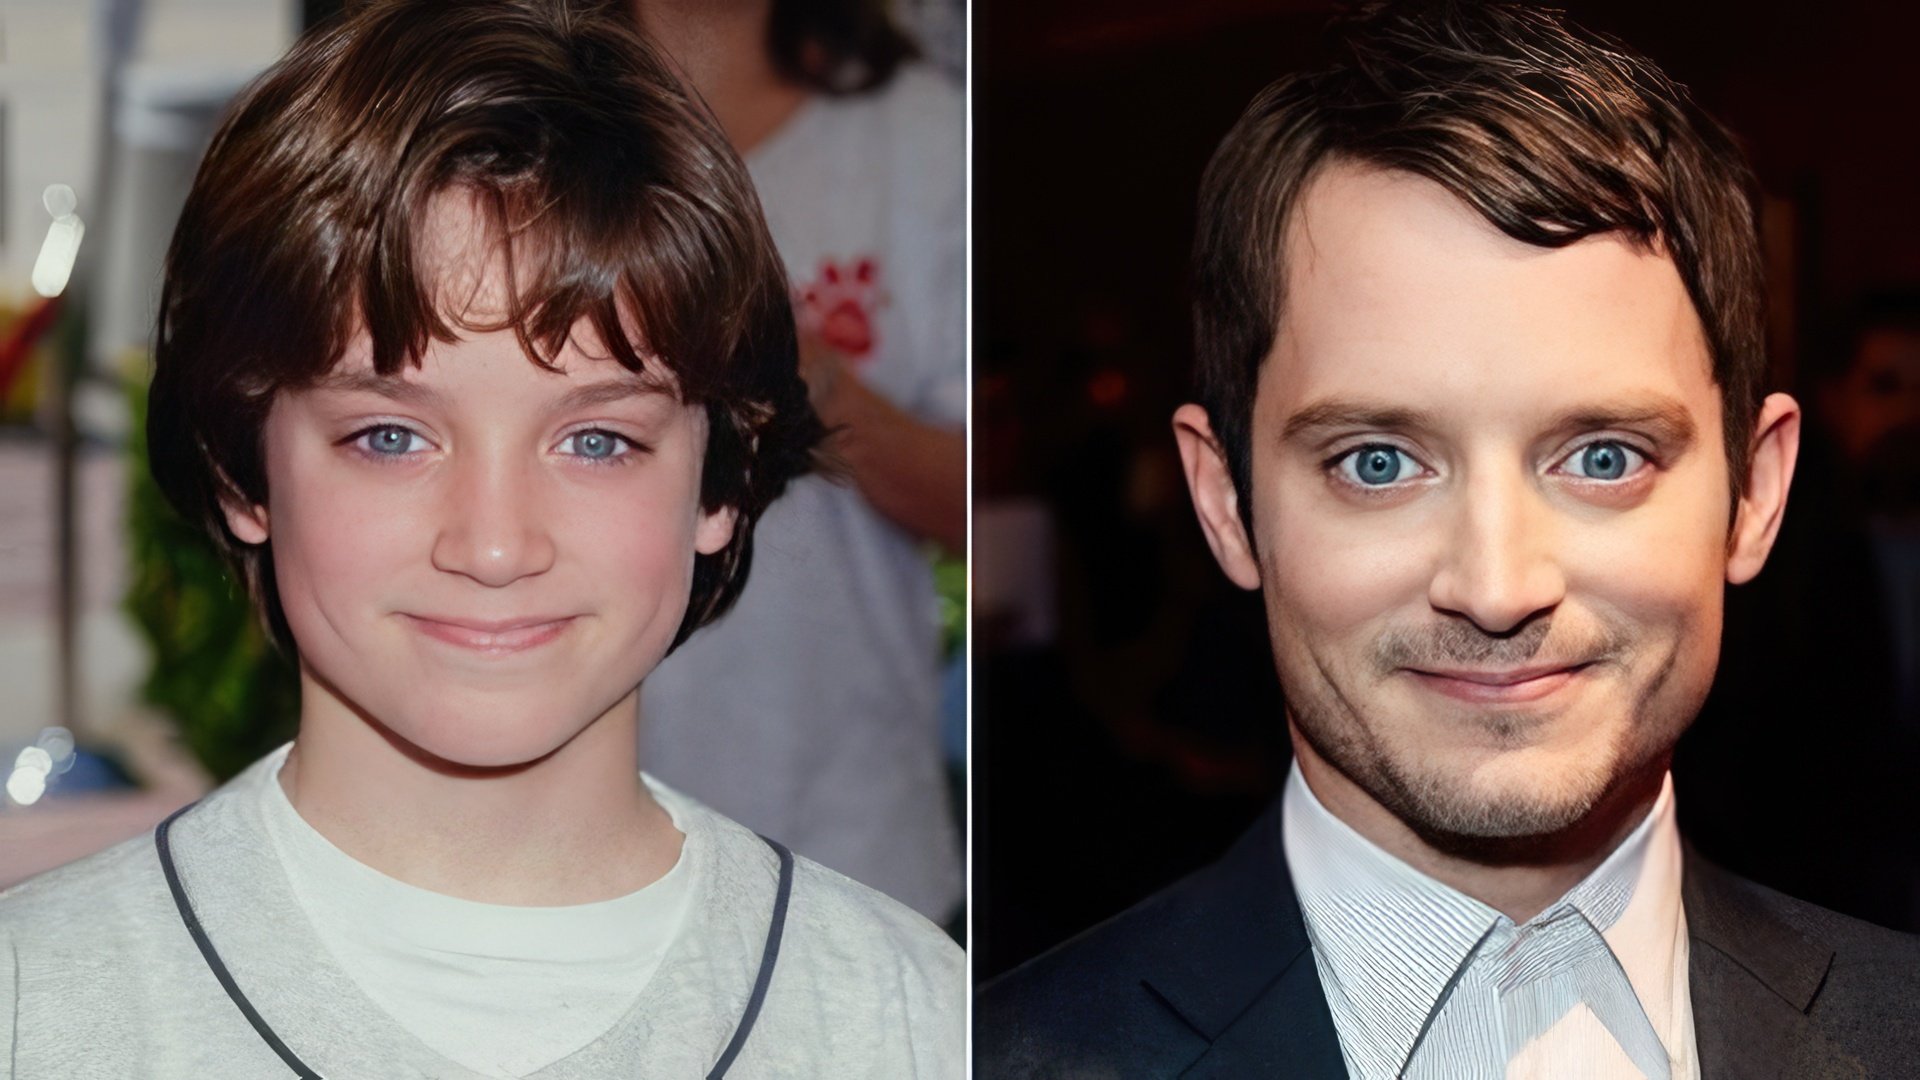 Elijah Wood in his childhood and now